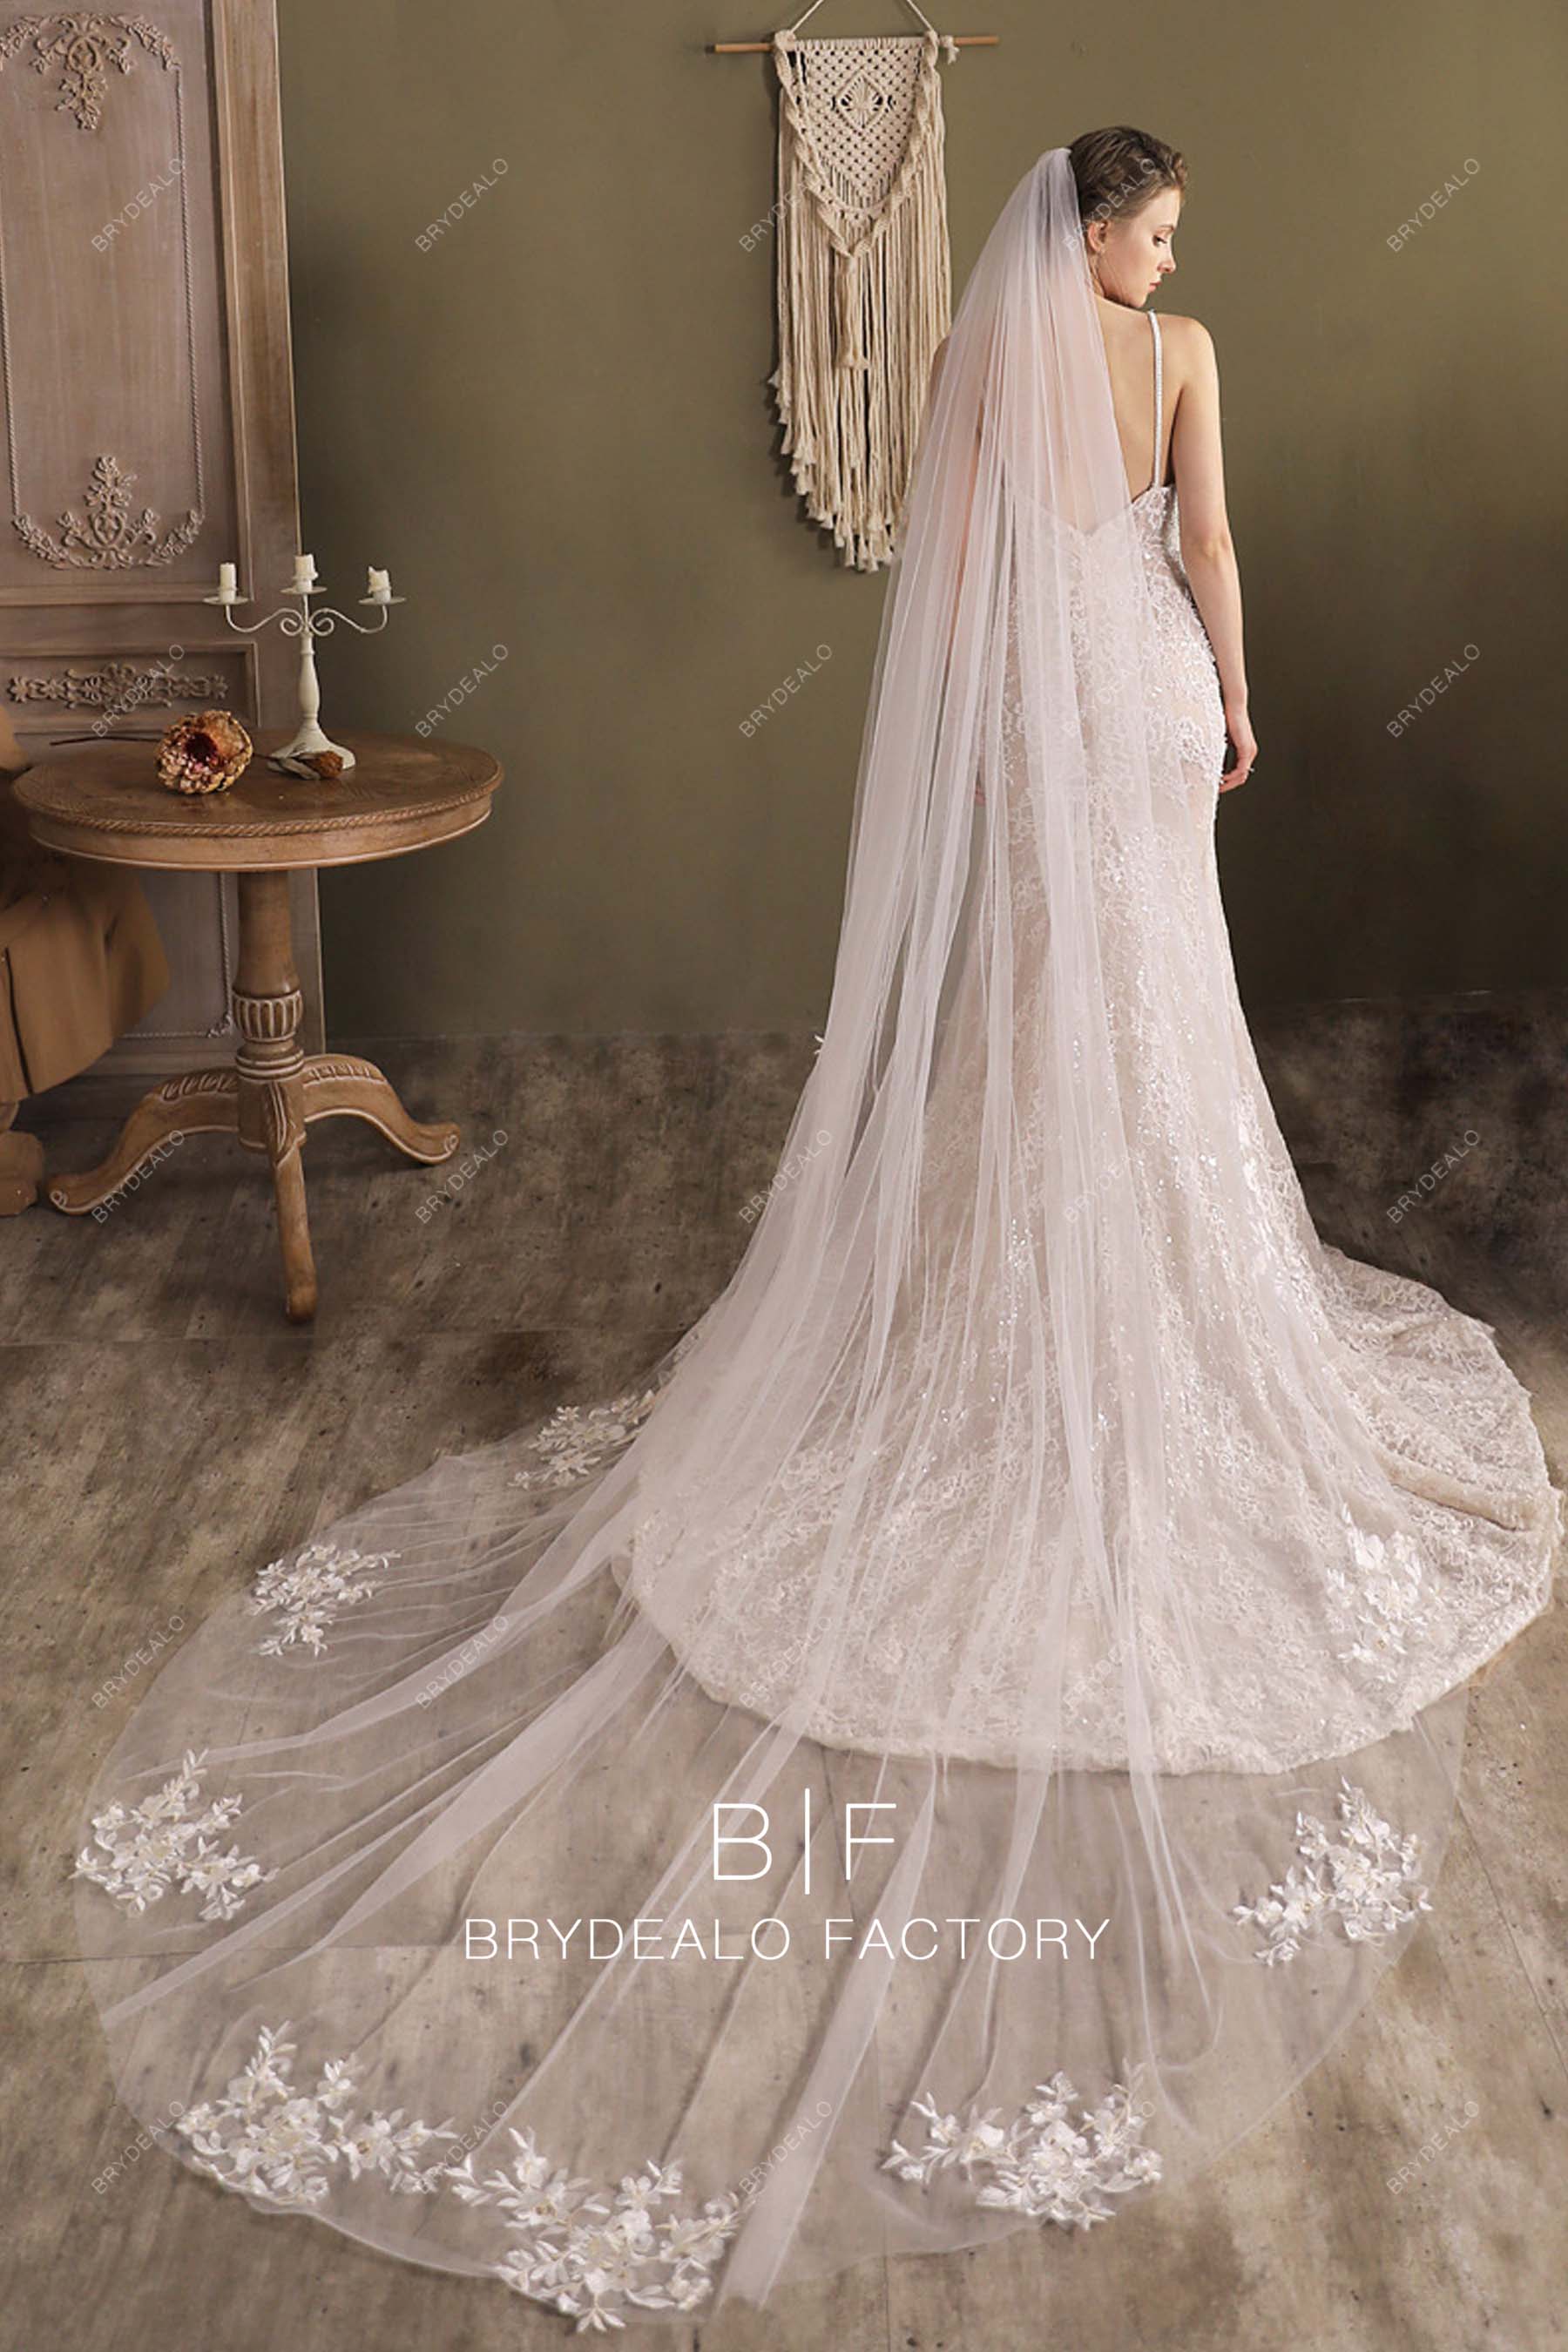 Cathedral Veil, Raw-Edge Tulle by Grace + Ivory